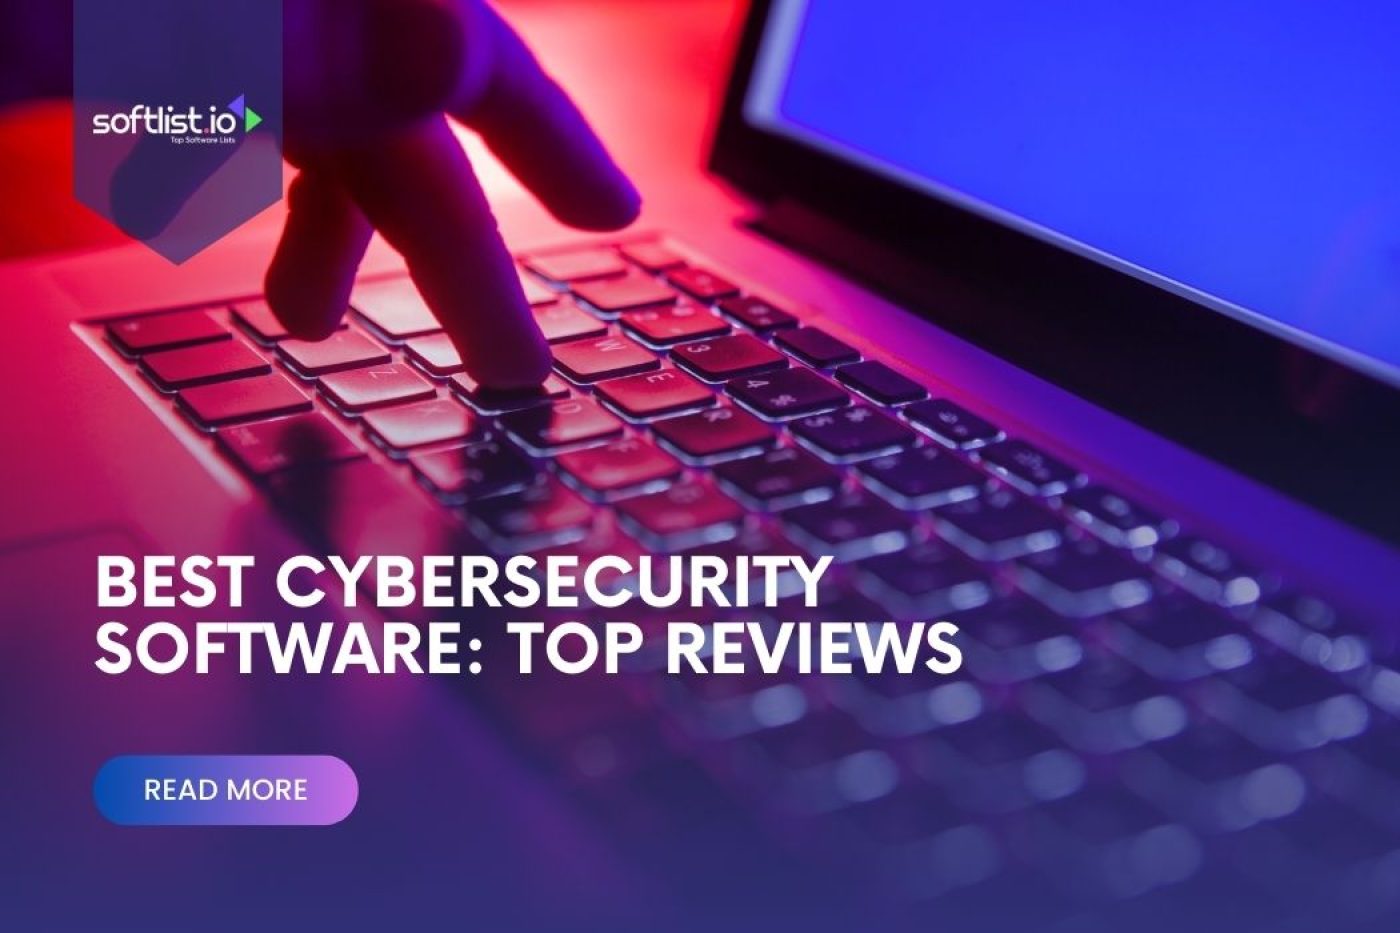 The Best Cybersecurity Software